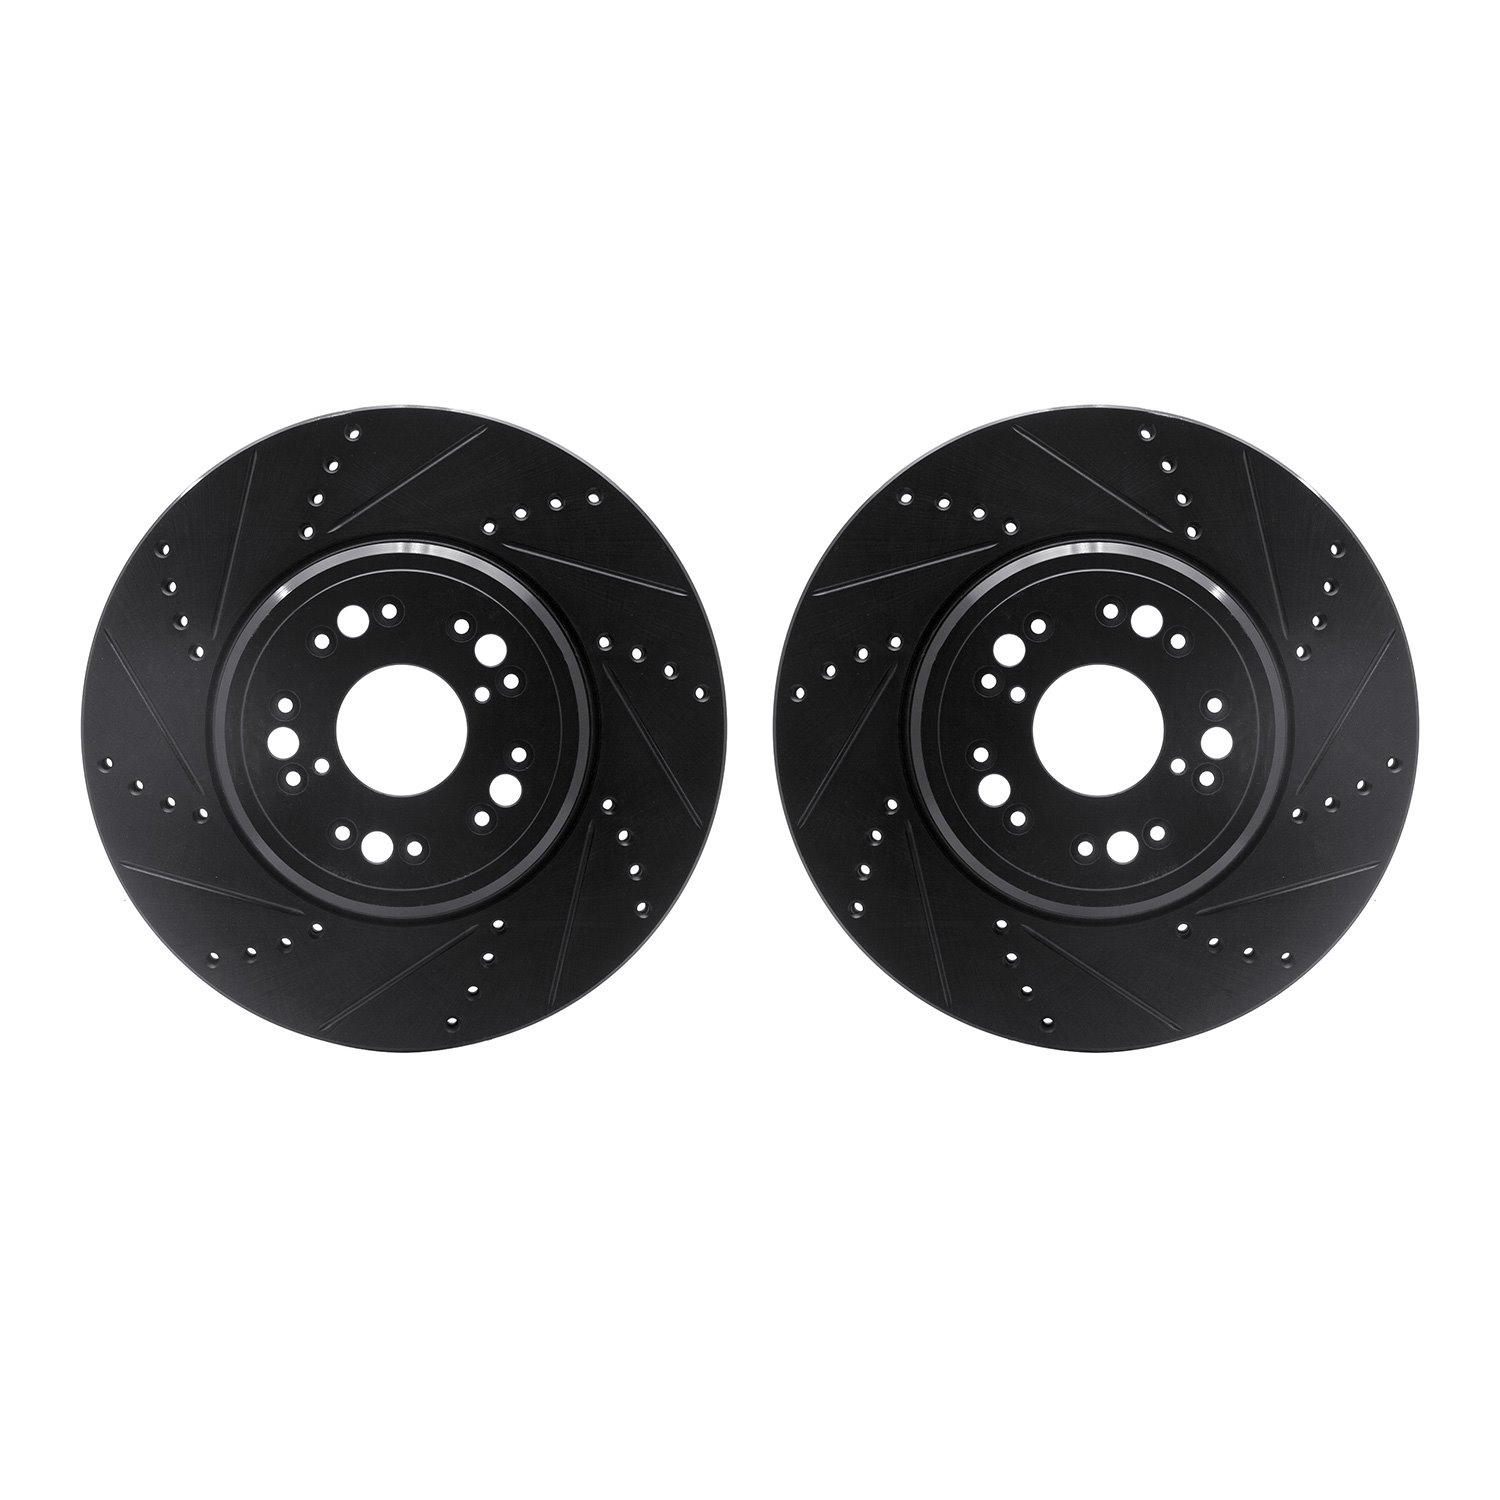 8002-75013 Drilled/Slotted Brake Rotors [Black], 1995-2000 Lexus/Toyota/Scion, Position: Front